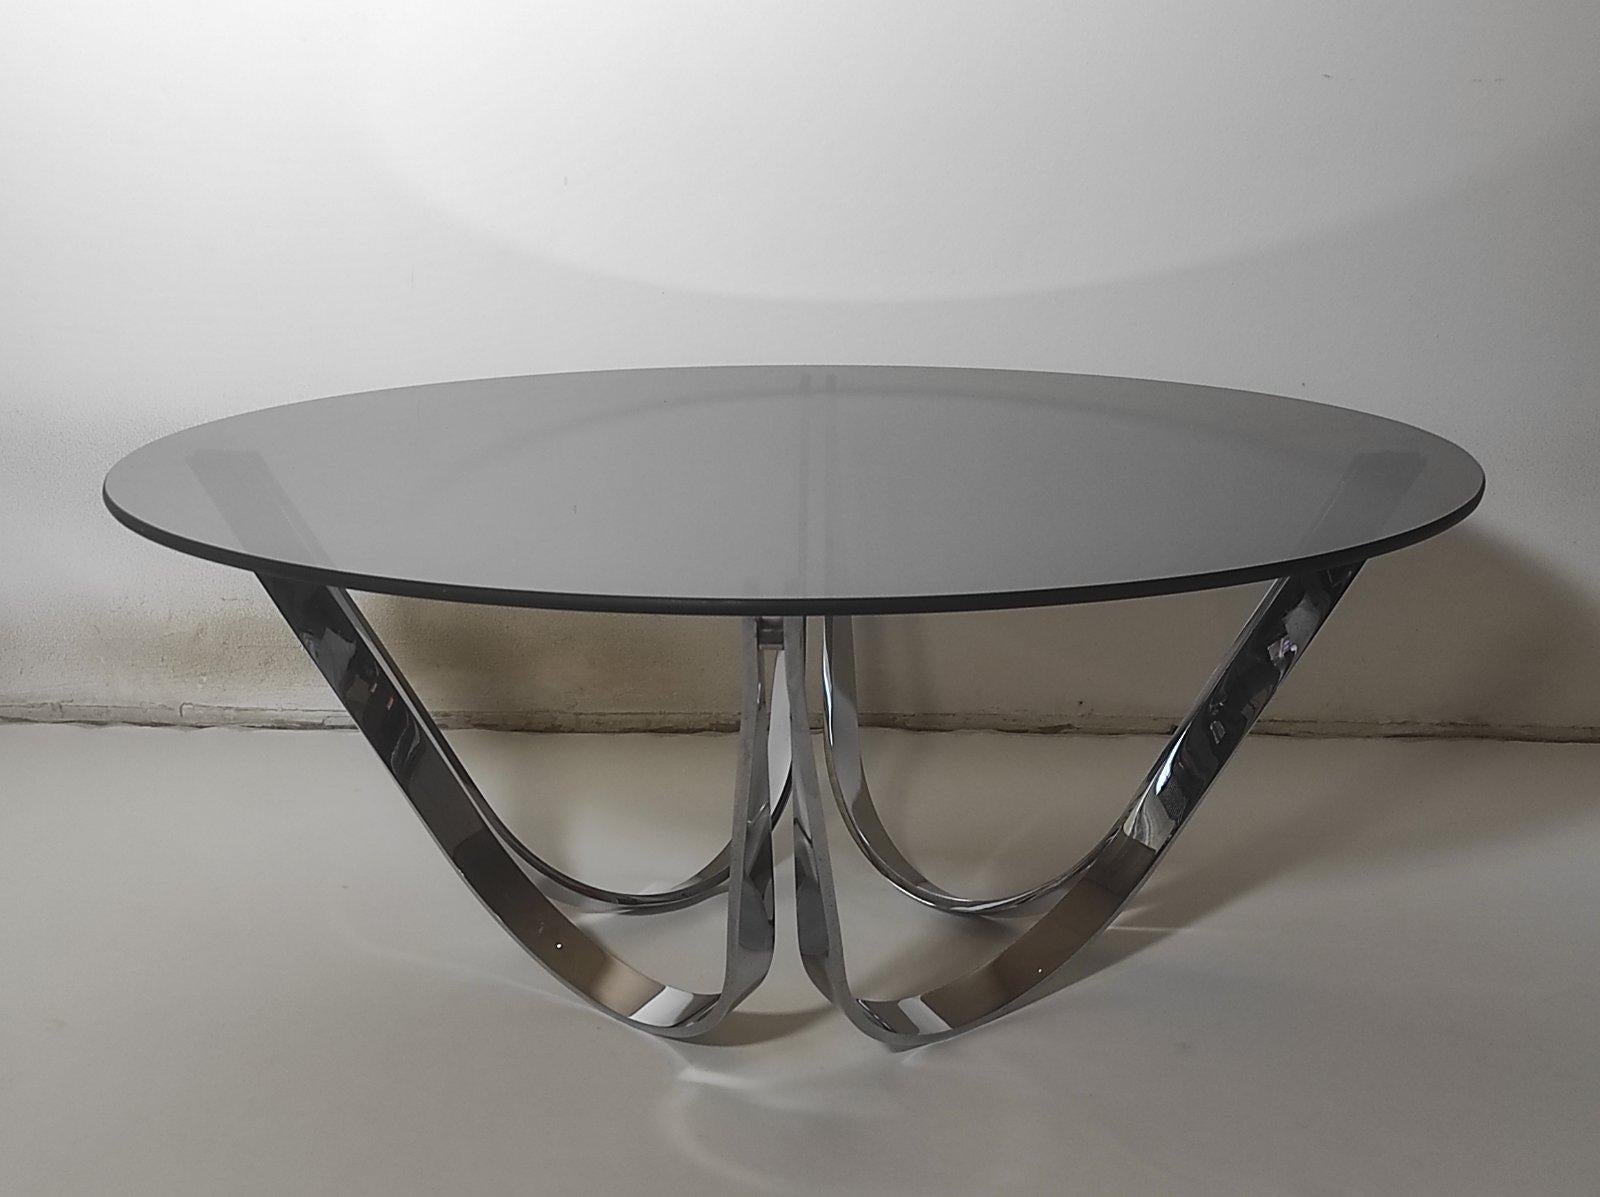 Chrome and Smoked glass Coffee Table By Roger Sprunger for Dunbar 1970s For Sale 3